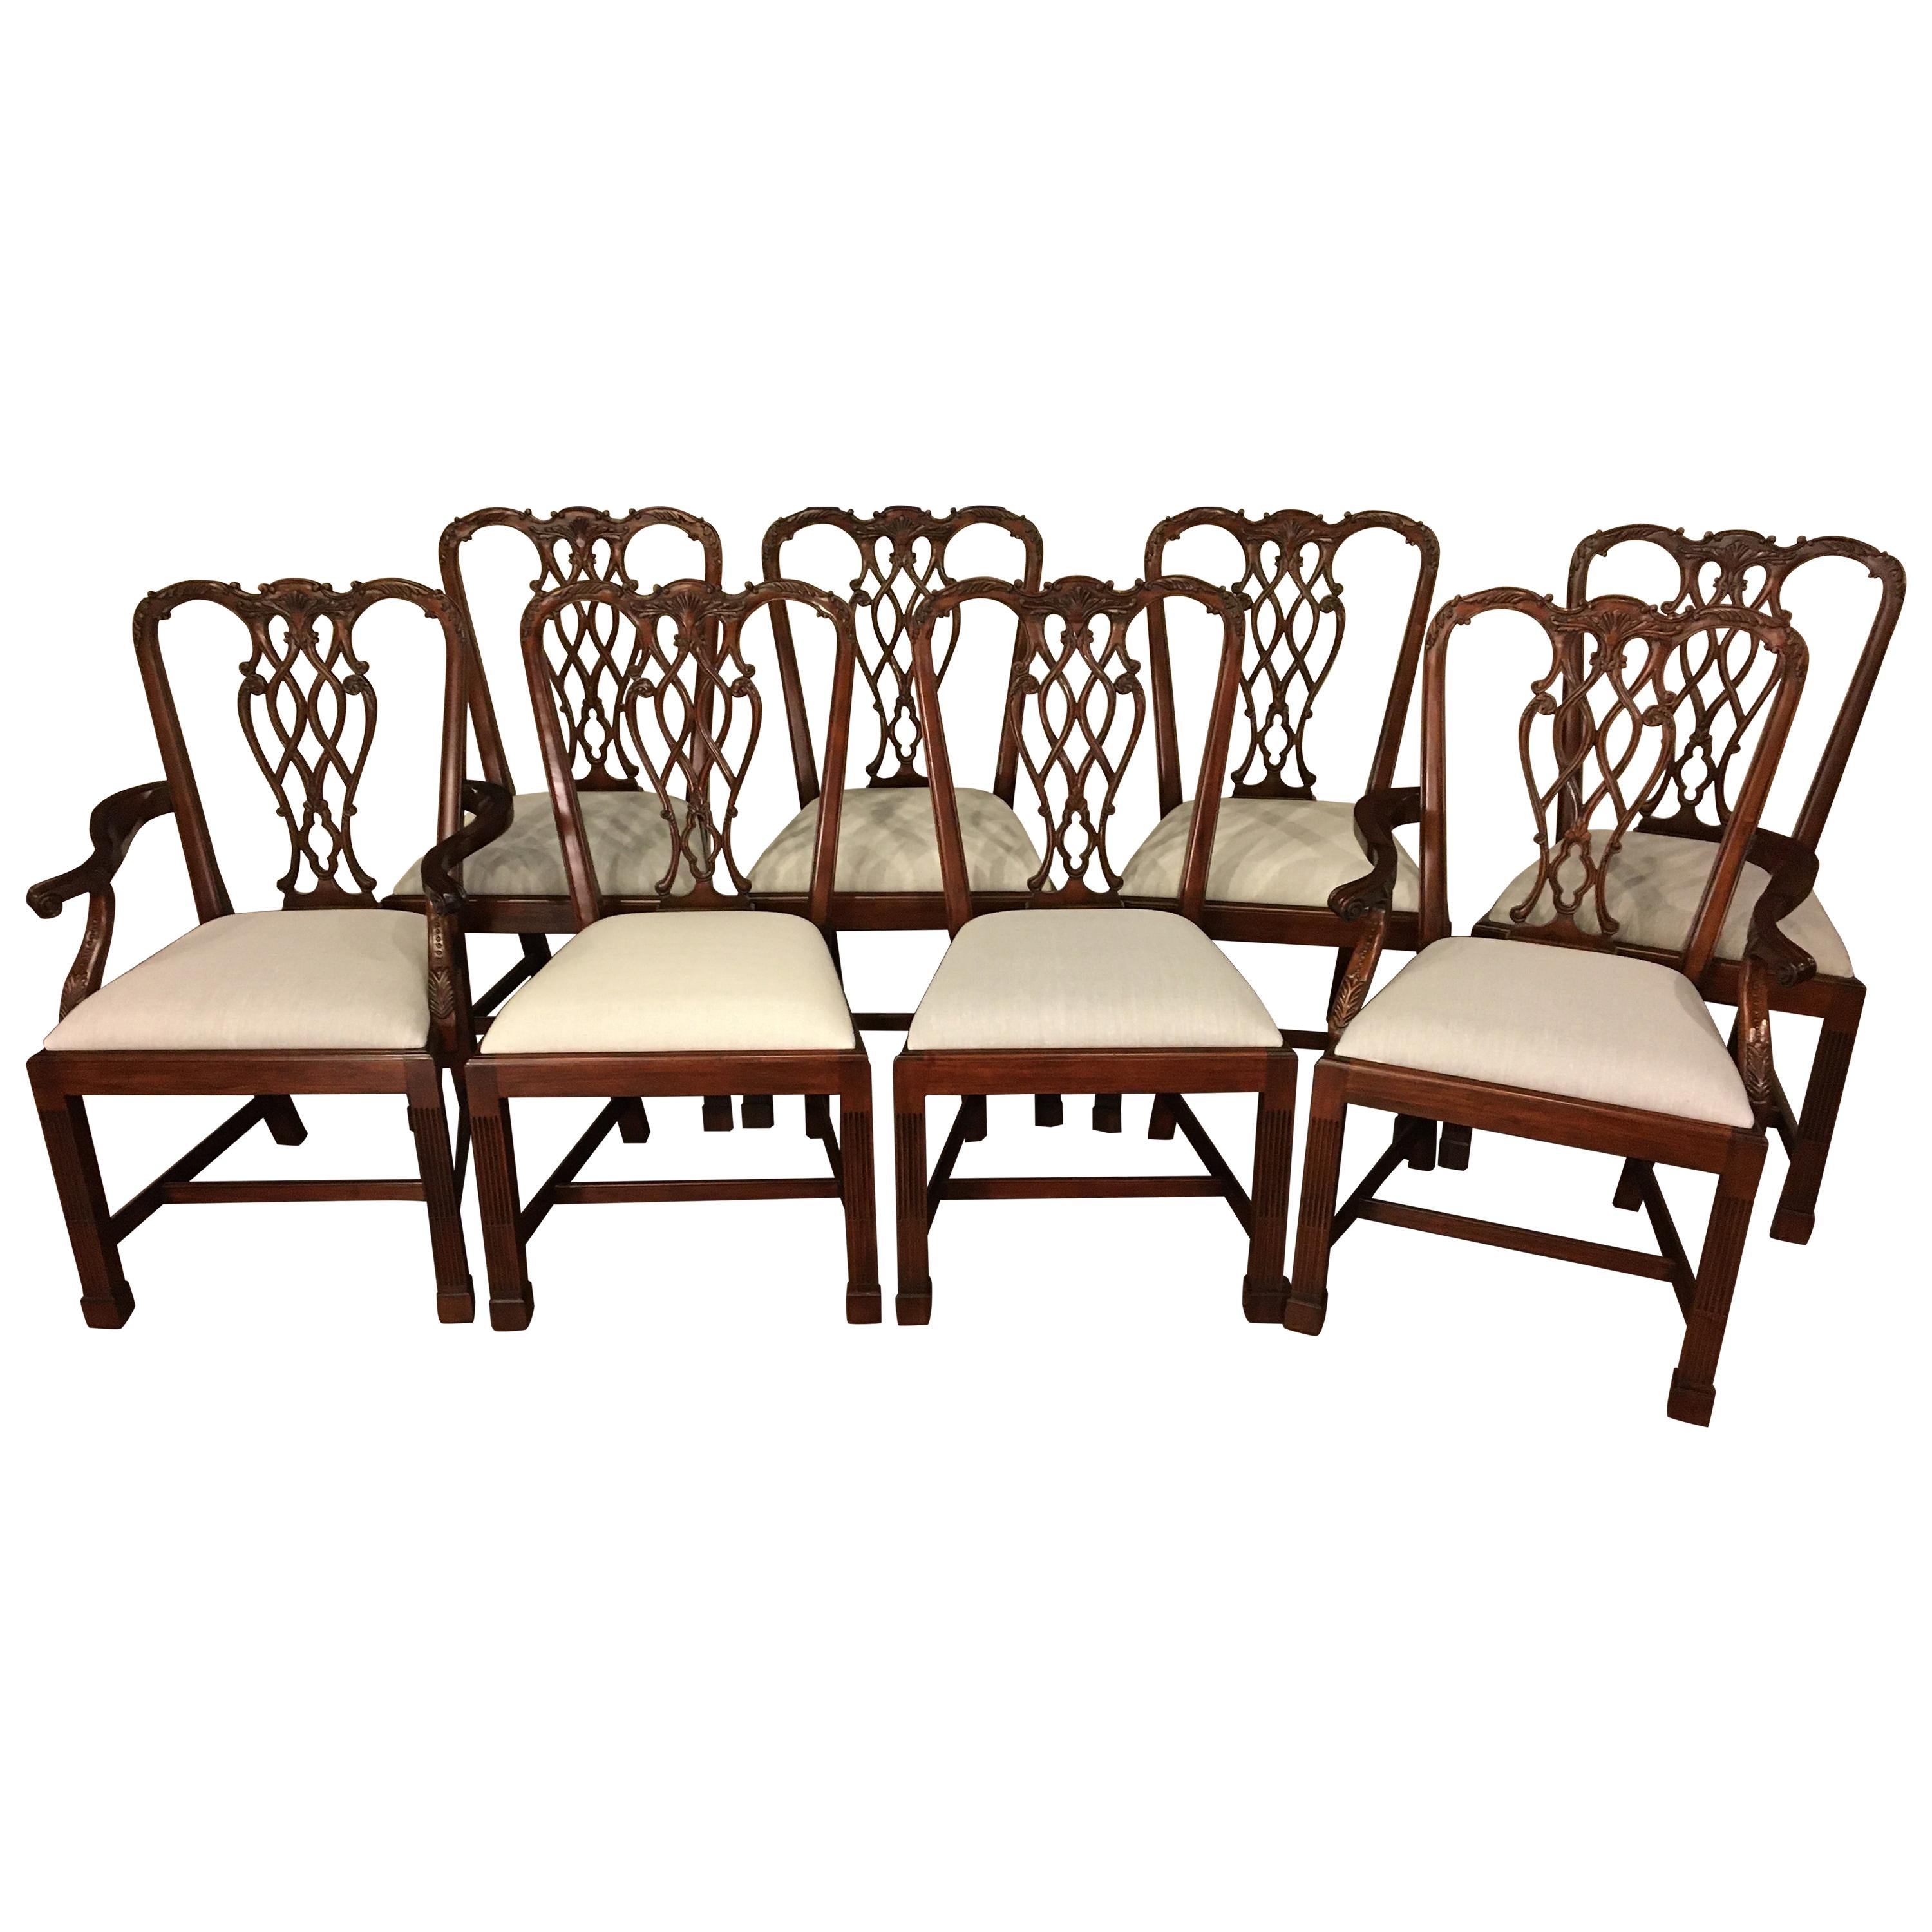 Eight New Straight Leg Chippendale Style Dining Chairs by Leighton Hall